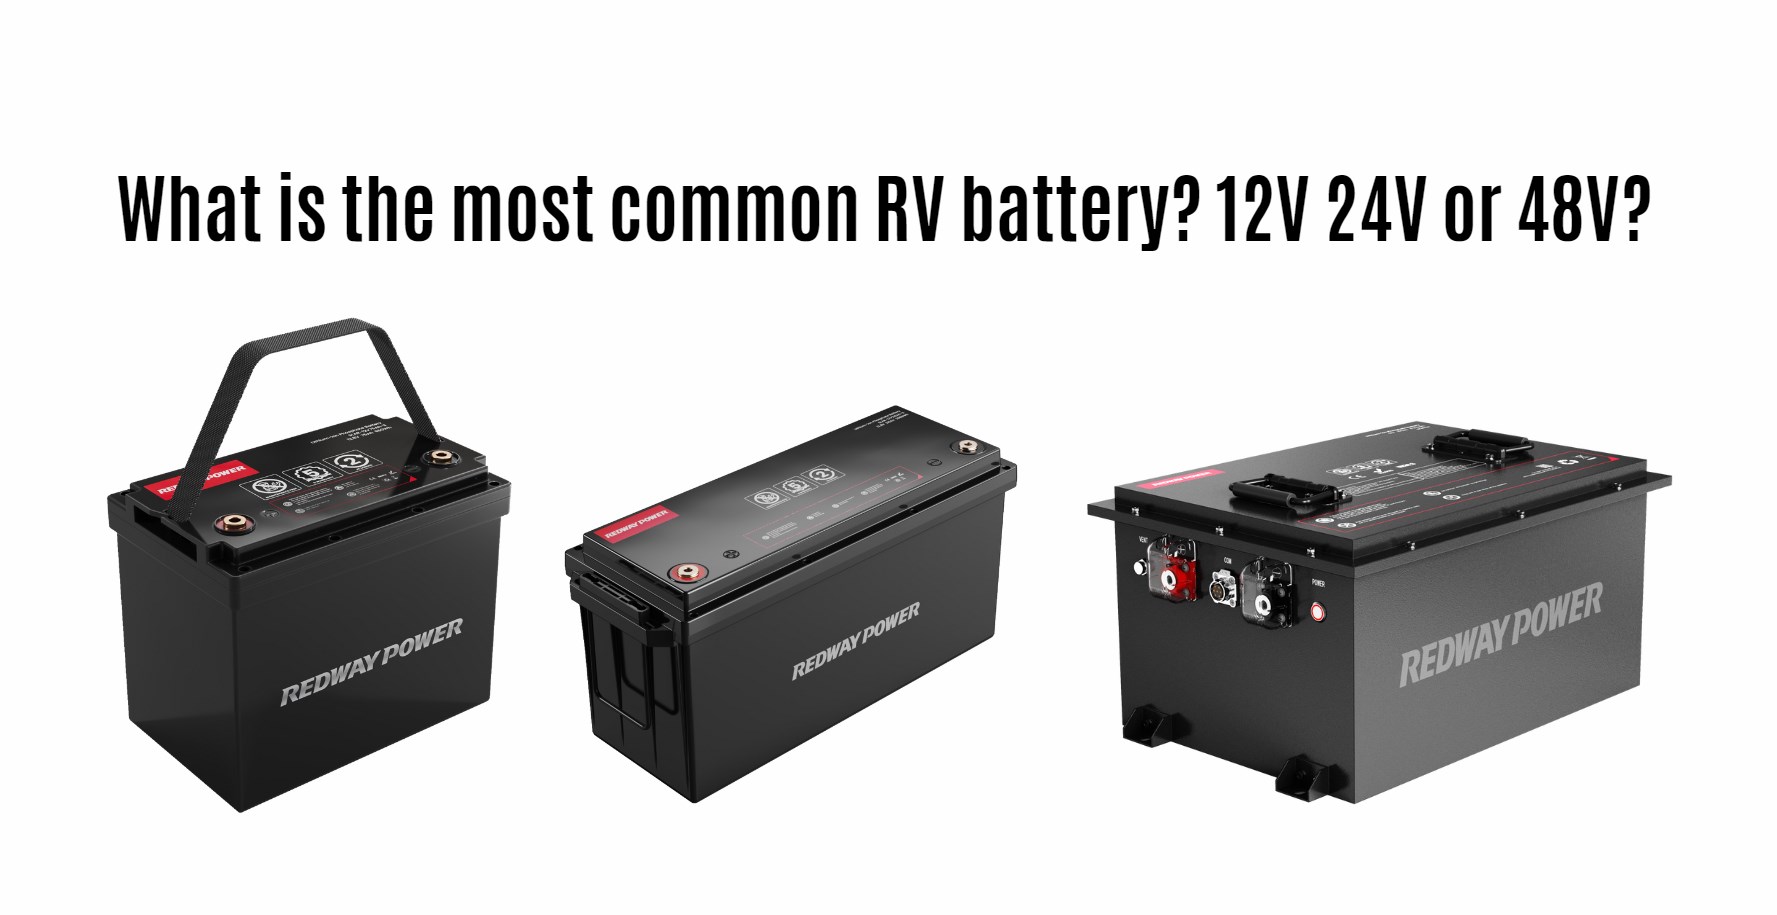 What is the most common RV battery? 12v 24v or 48v? top 1 rv lithium battery manufacturer factory redway power